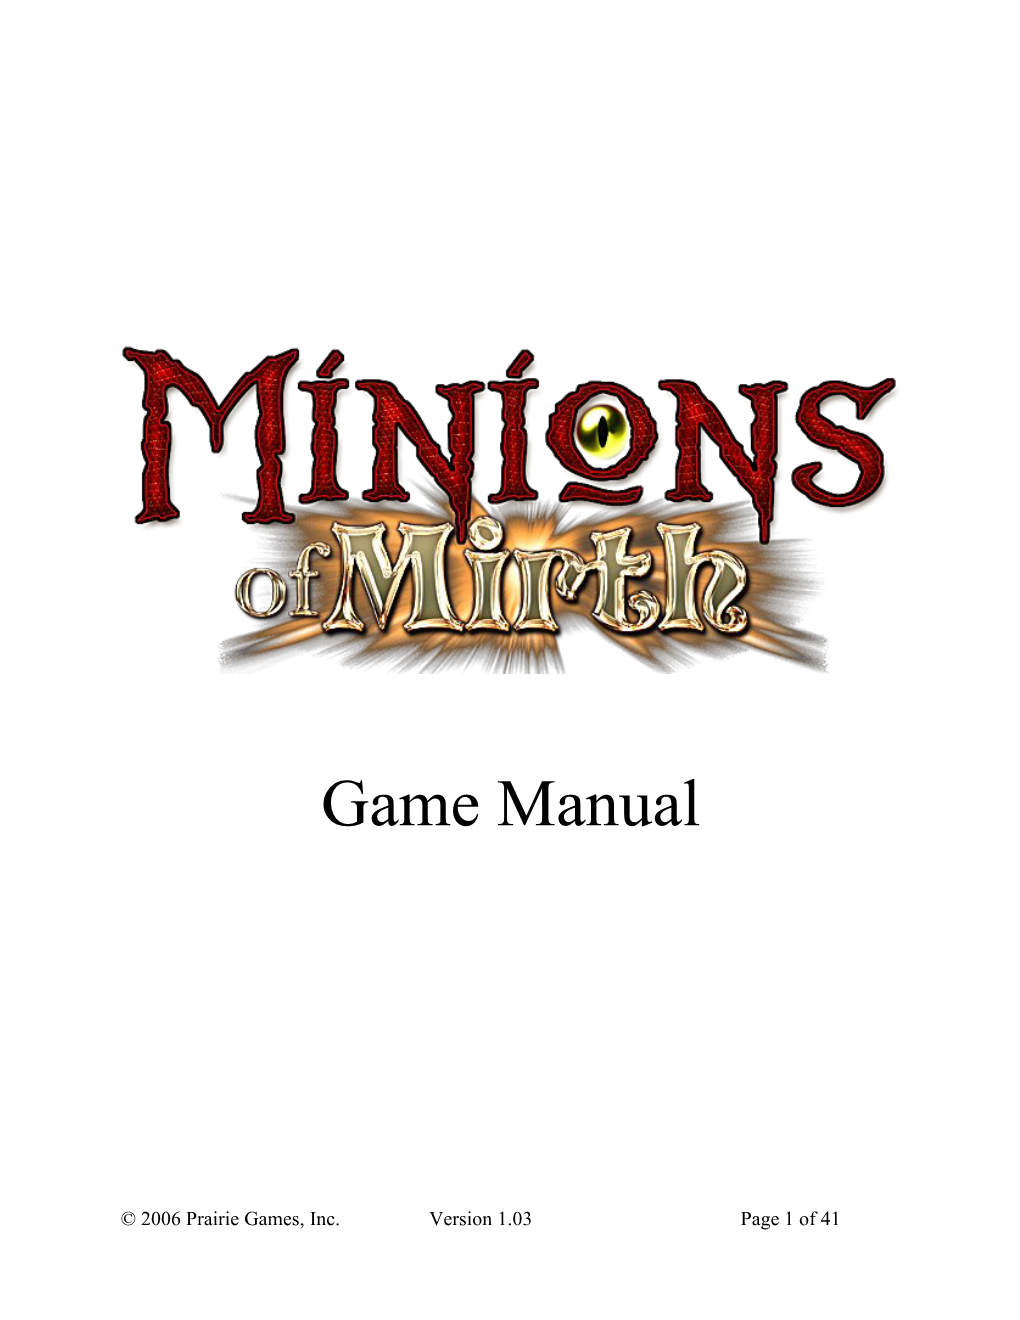 Minions of Mirth Manual: Table of Contents